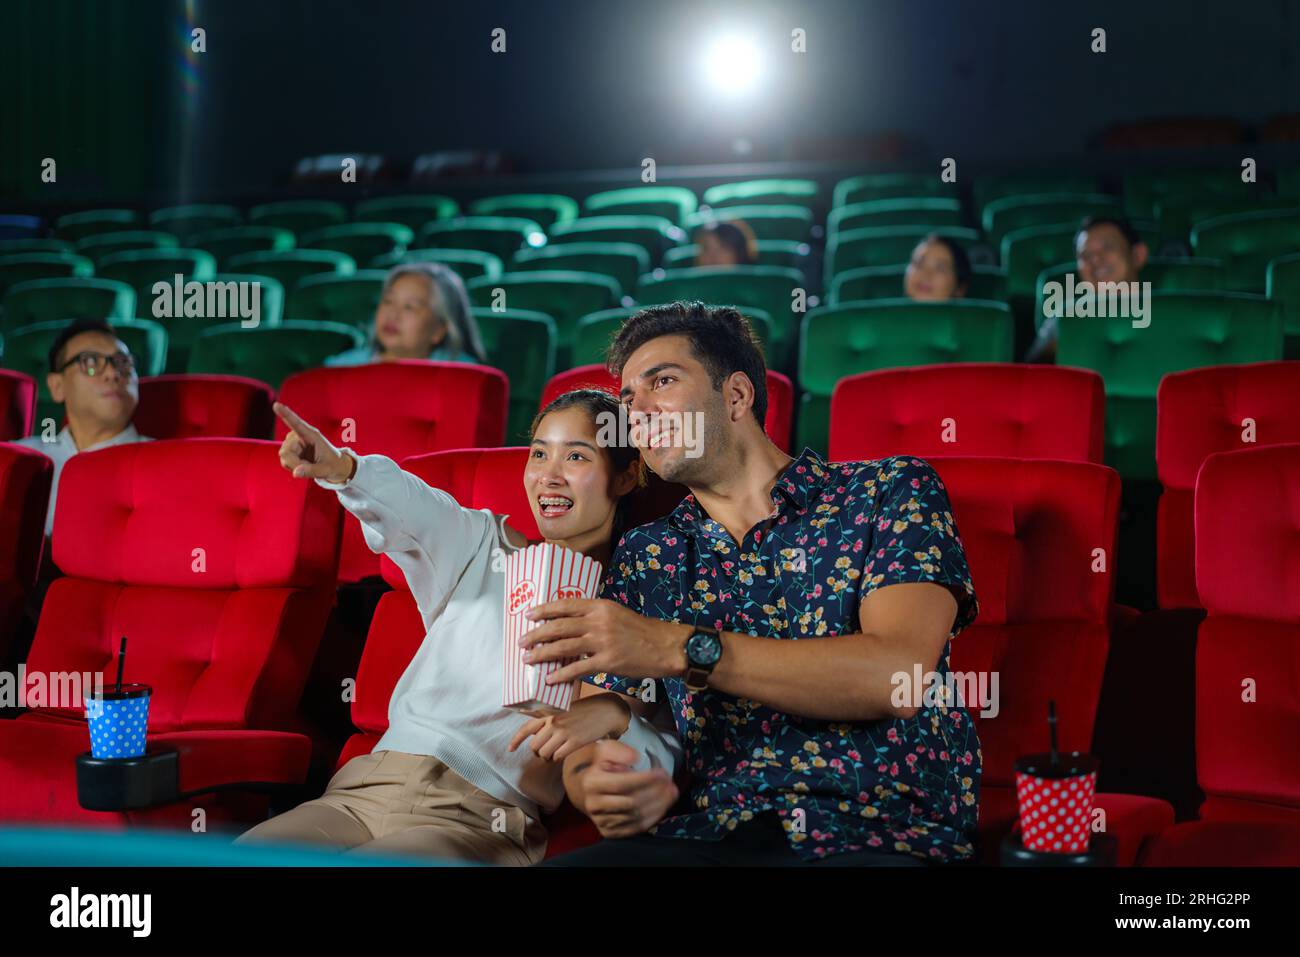 Couples enjoy movies while holding popcorn, creating a cozy and entertaining movie night experience at the cinema. Stock Photo